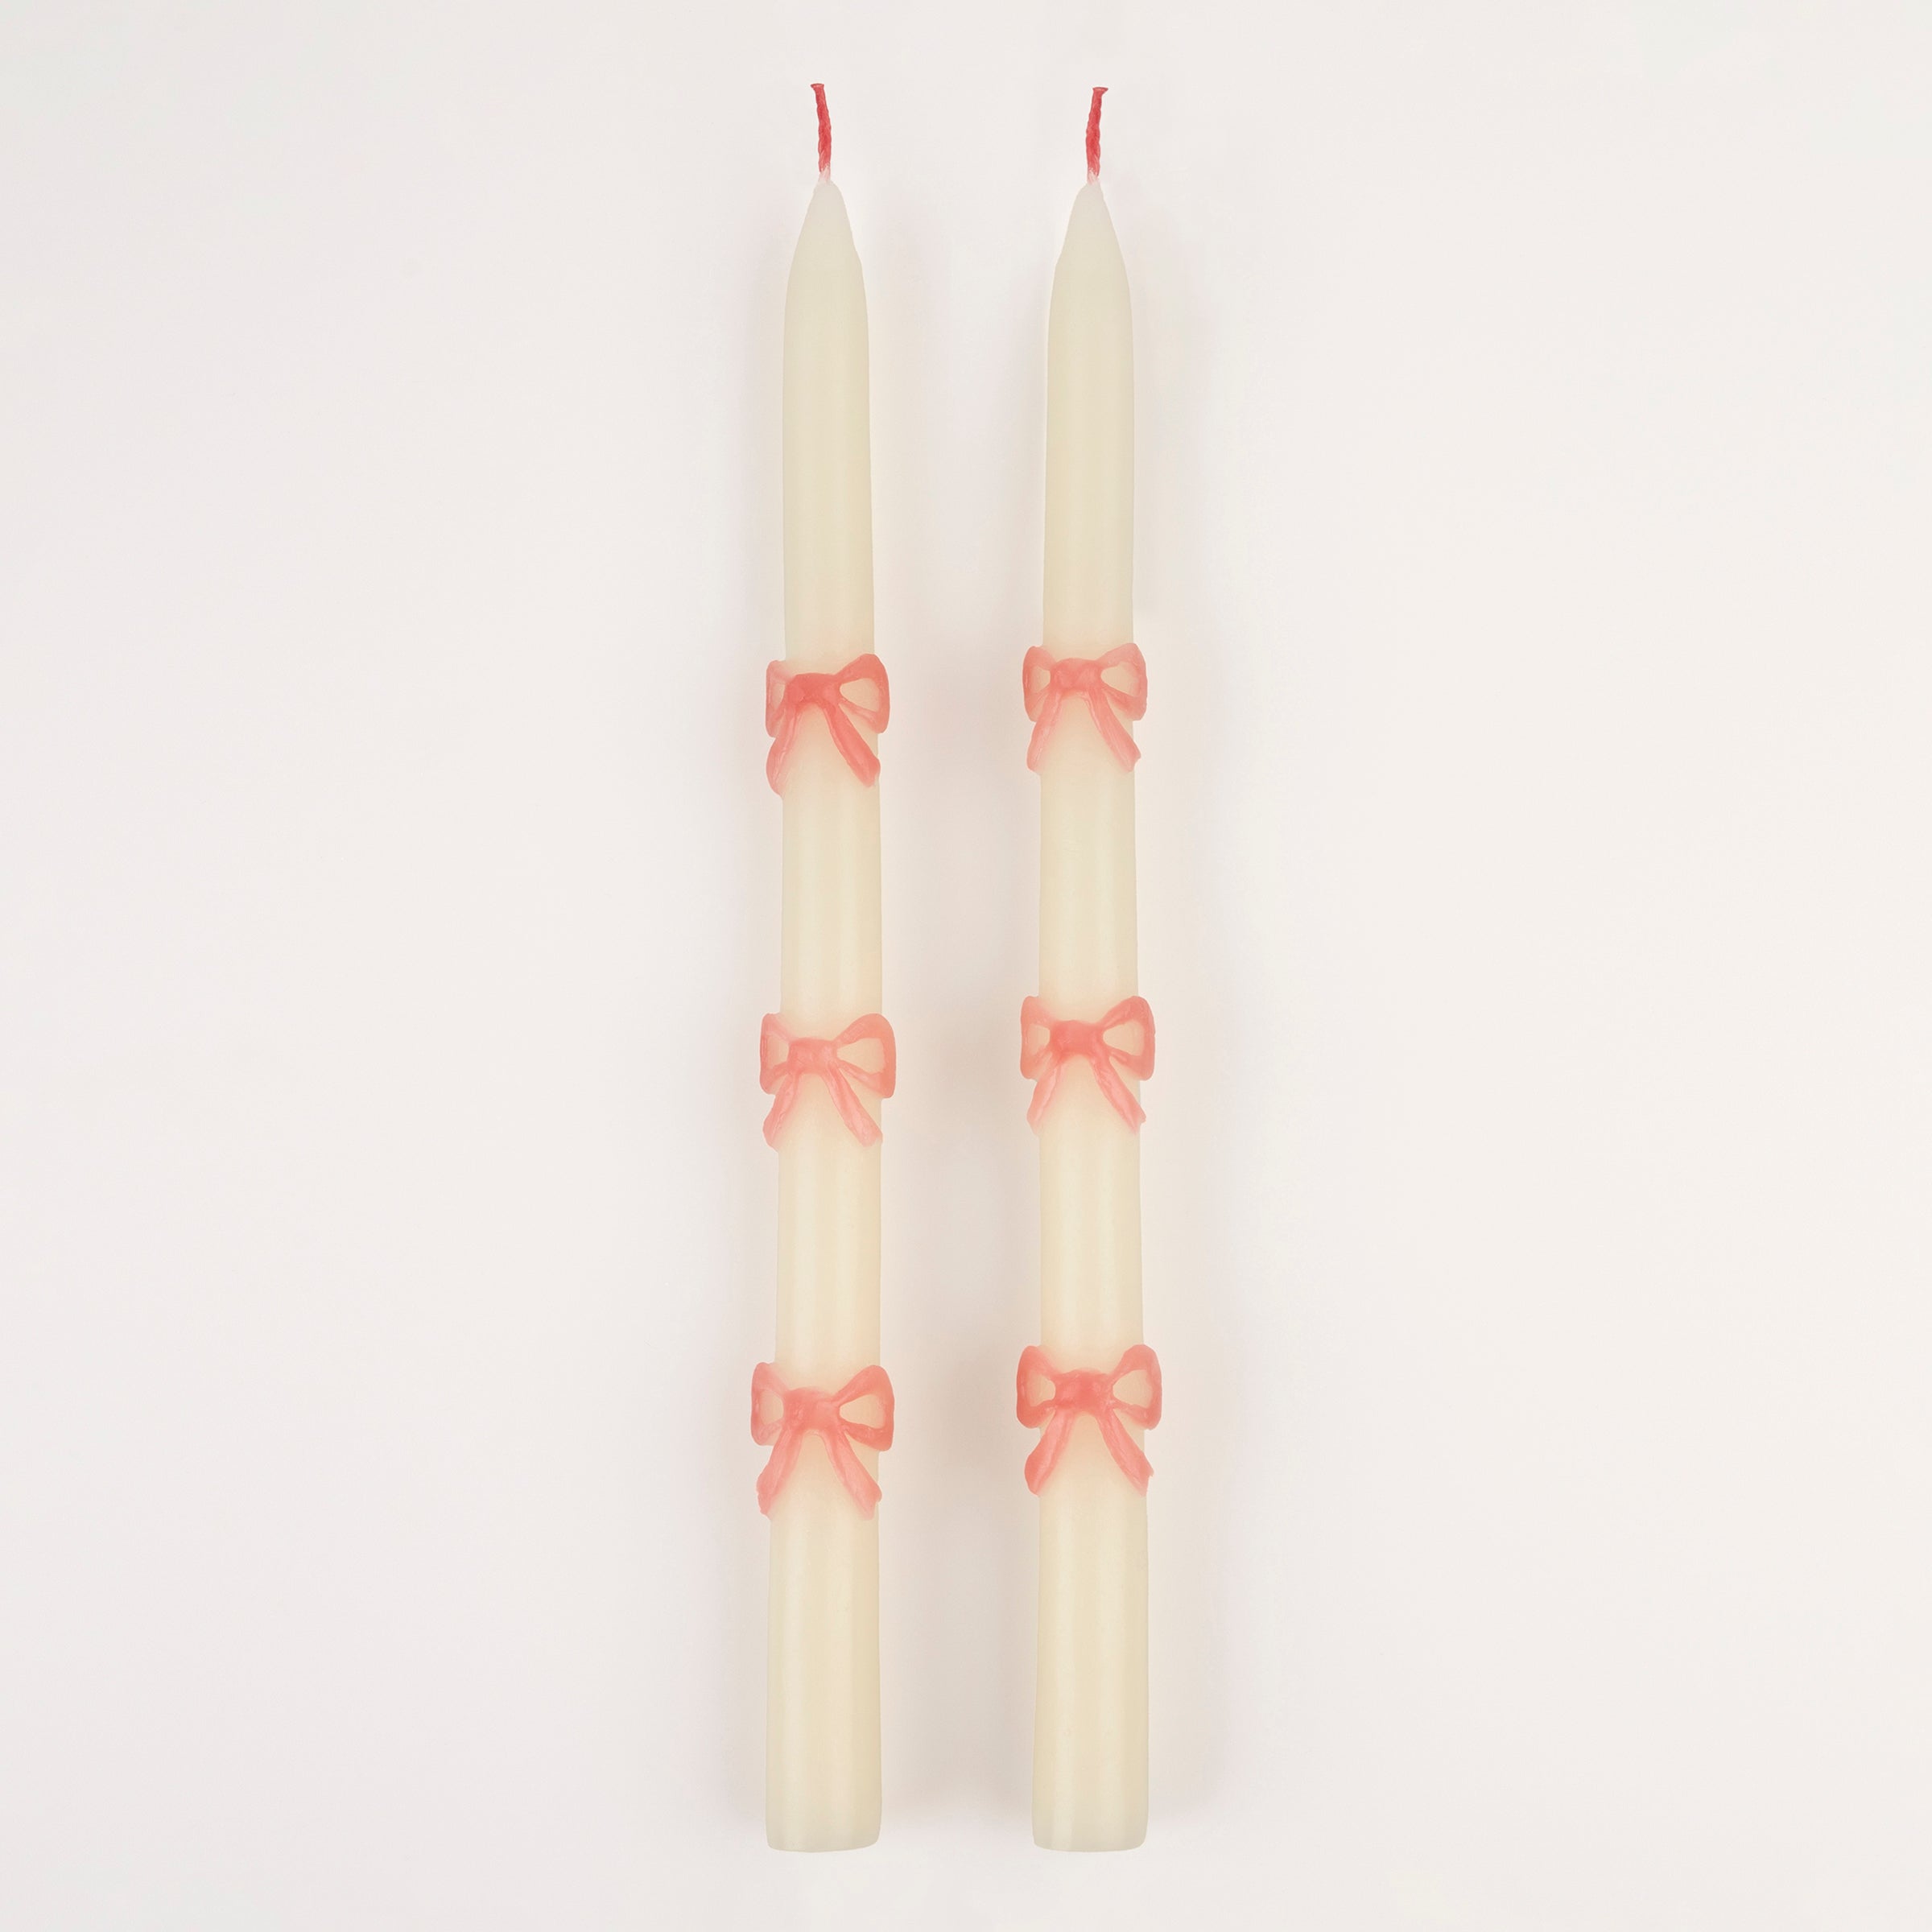 Our party candles feature handpainted pink bows and pretty pink wicks.